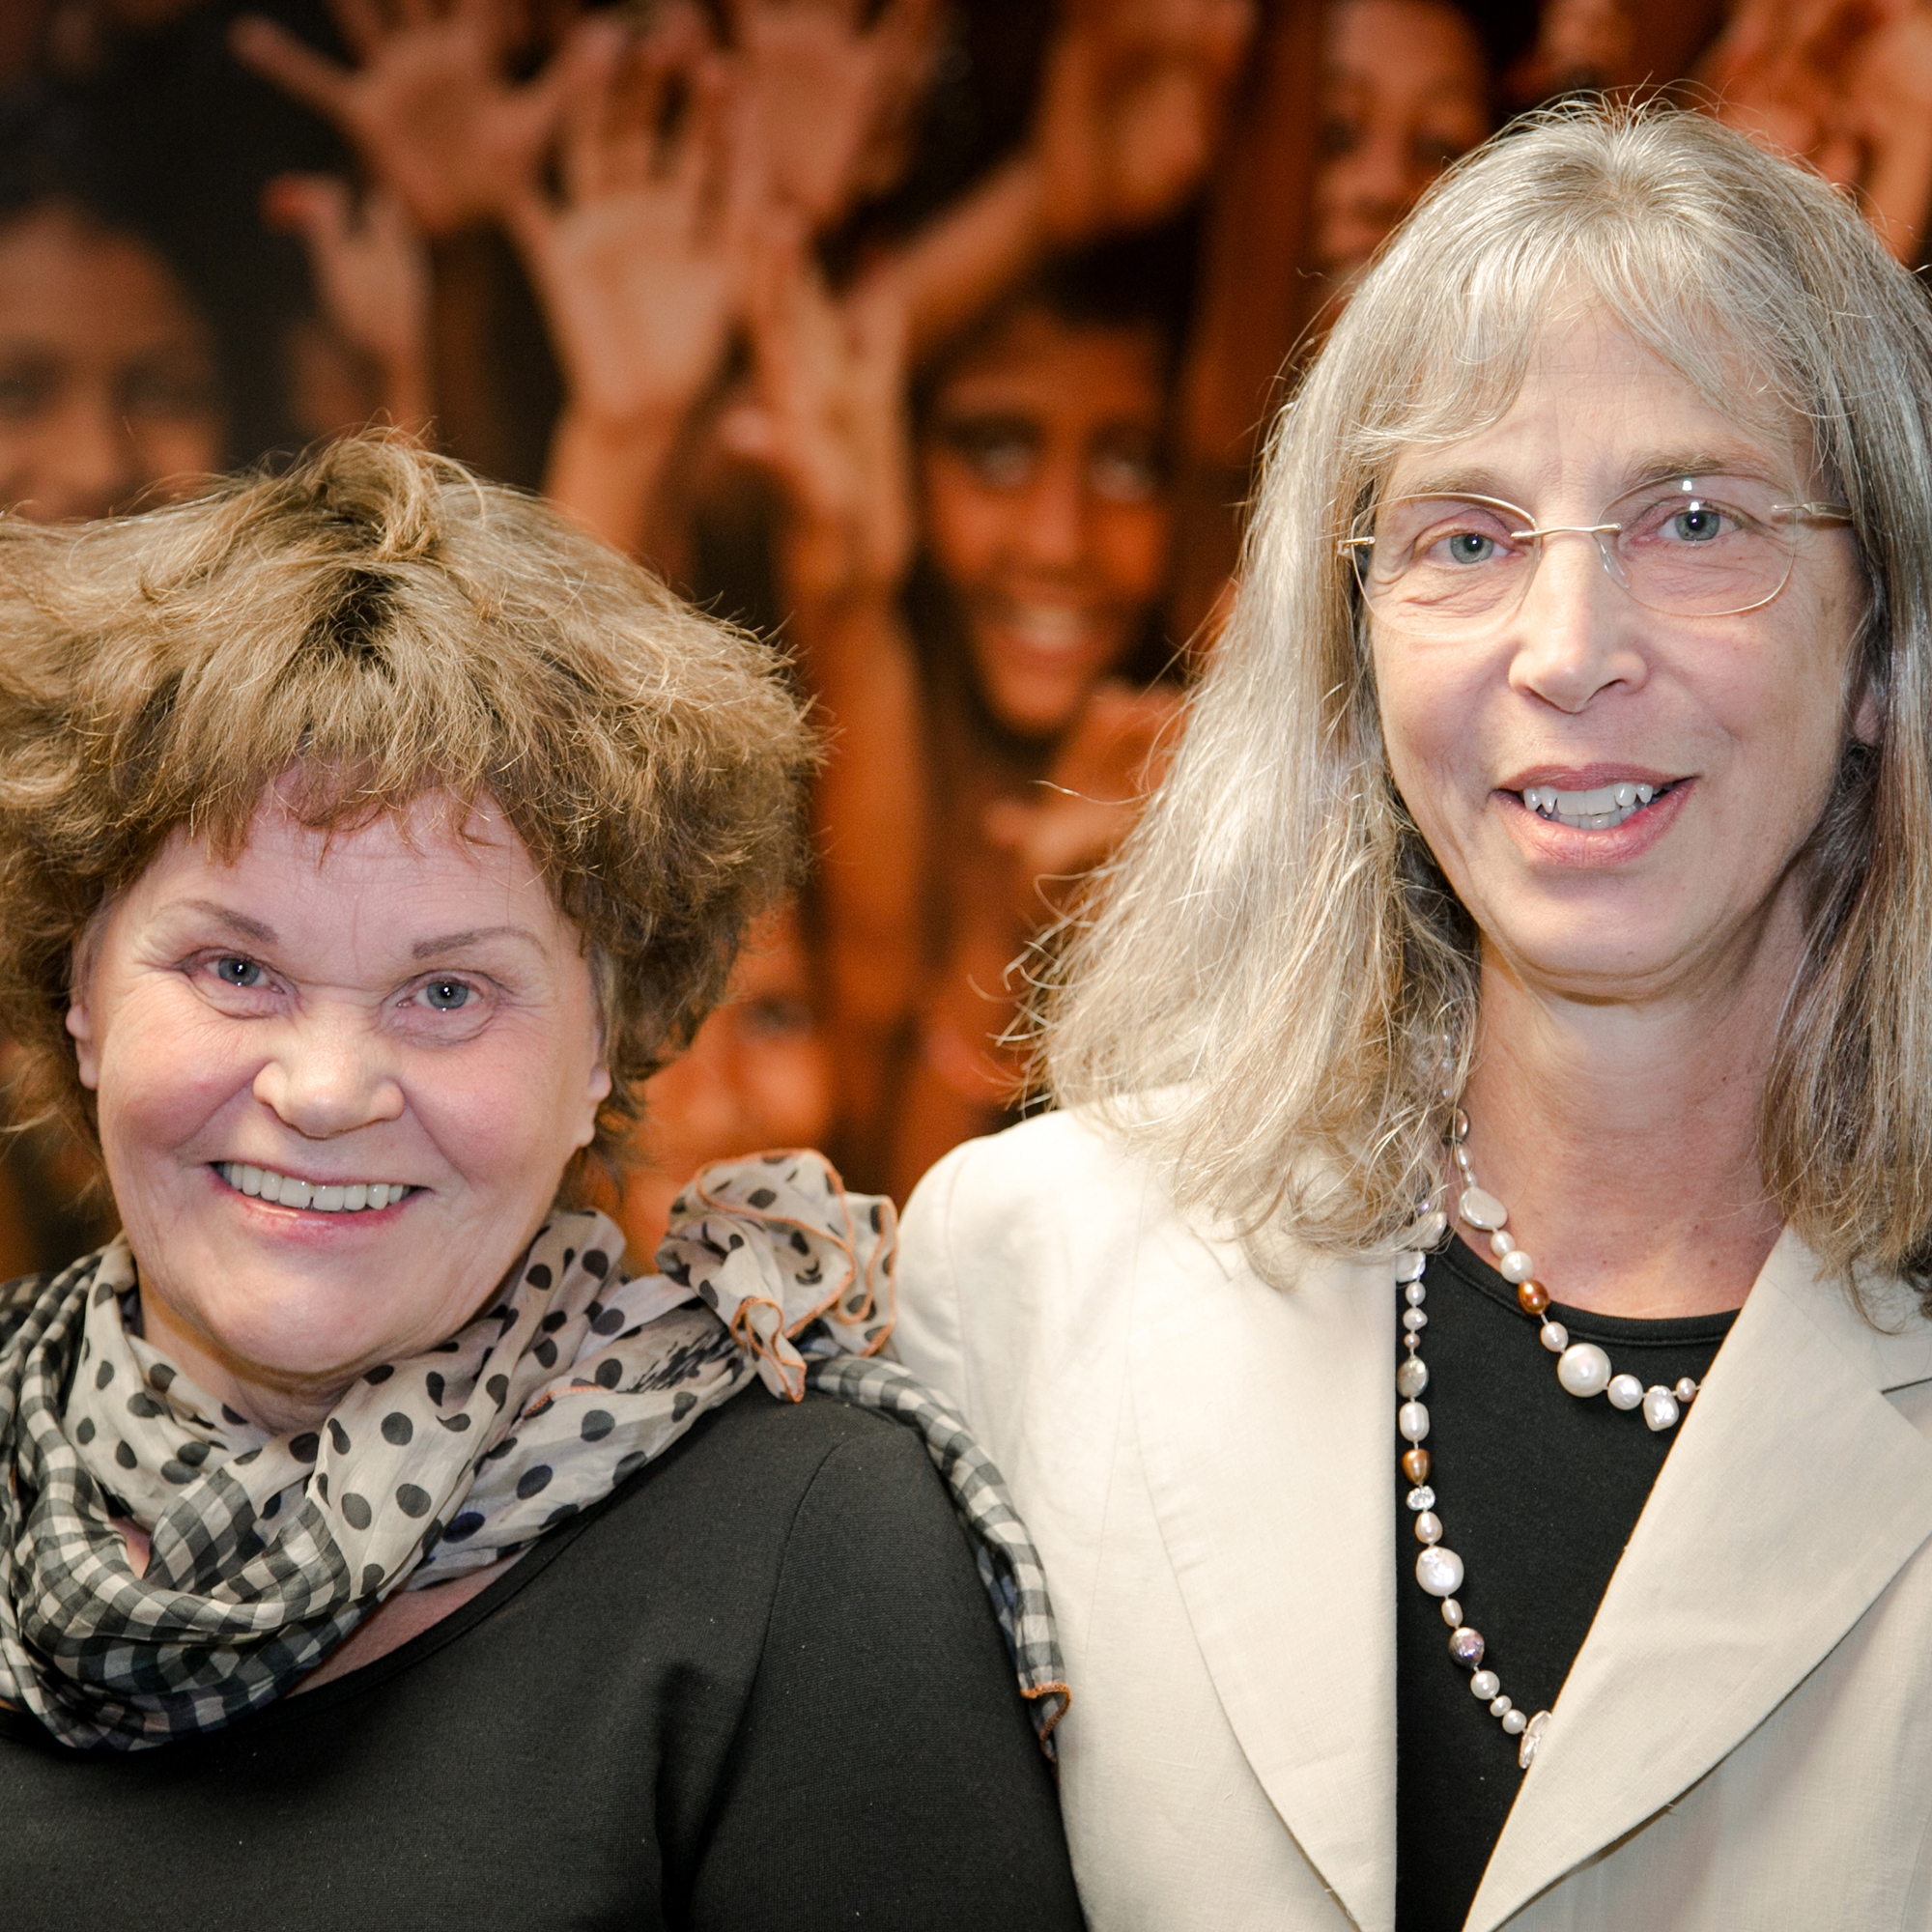 Two women – sponsor, Meredith and a formerly sponsored child, Paula – reunite after 47 years. They joined us at the Save the Children U.S. office to share their inspiring story and meet people from the organization who they say changed their lives. Photo credit: Save the Children, November 2017. 